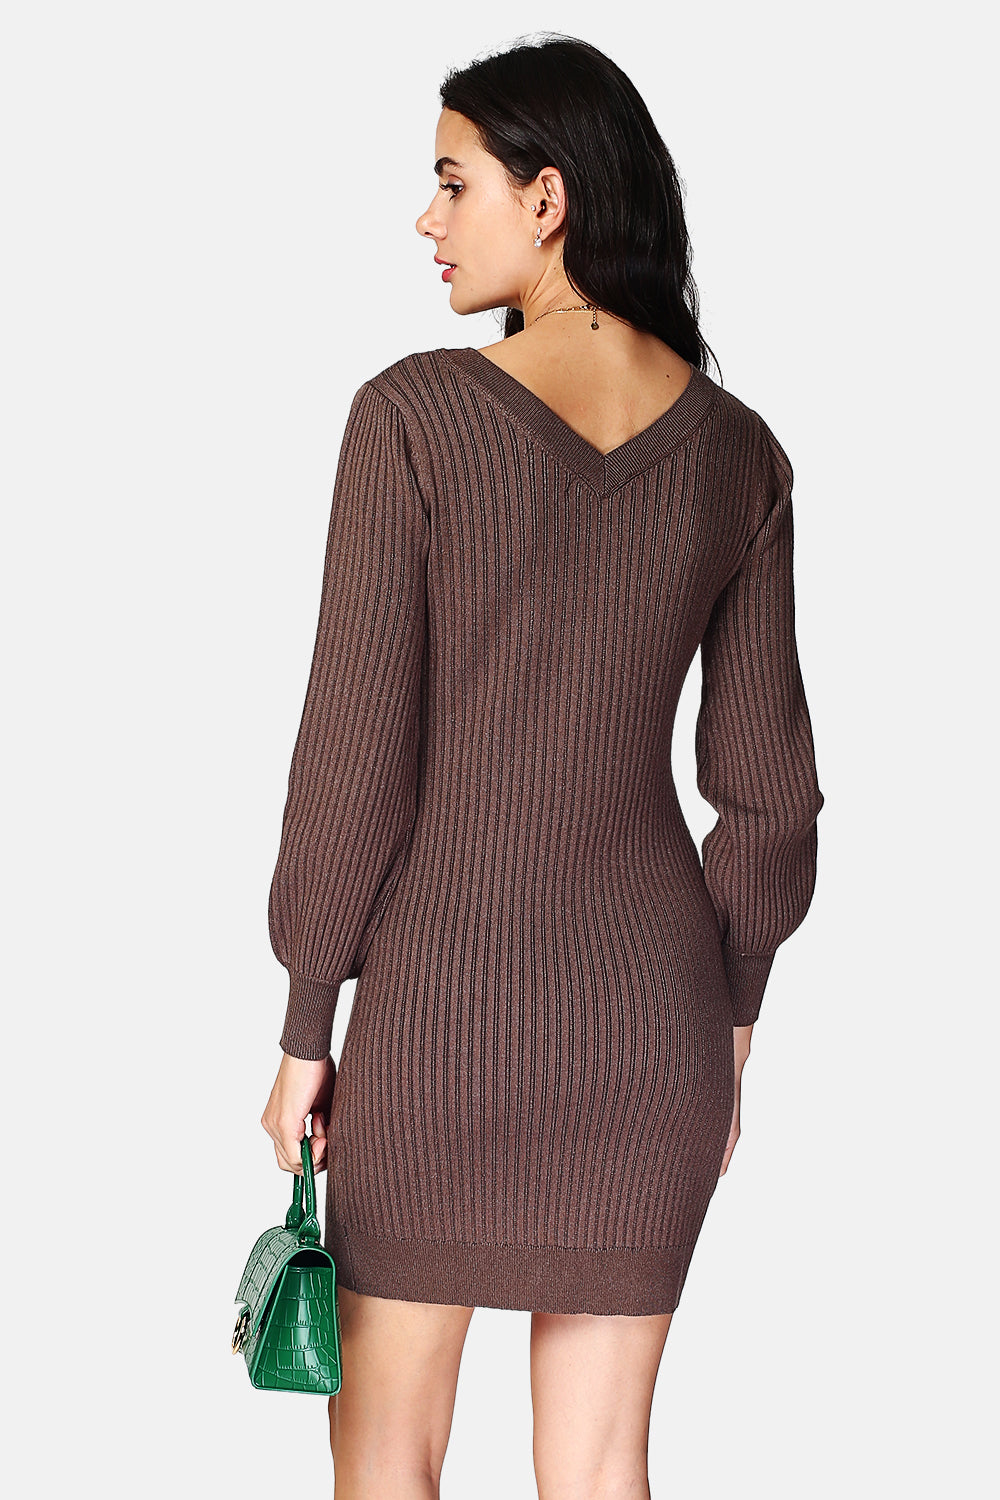 Loose-fit ribbed midi dress with V-neck in front and back with long, slightly puffy sleeves